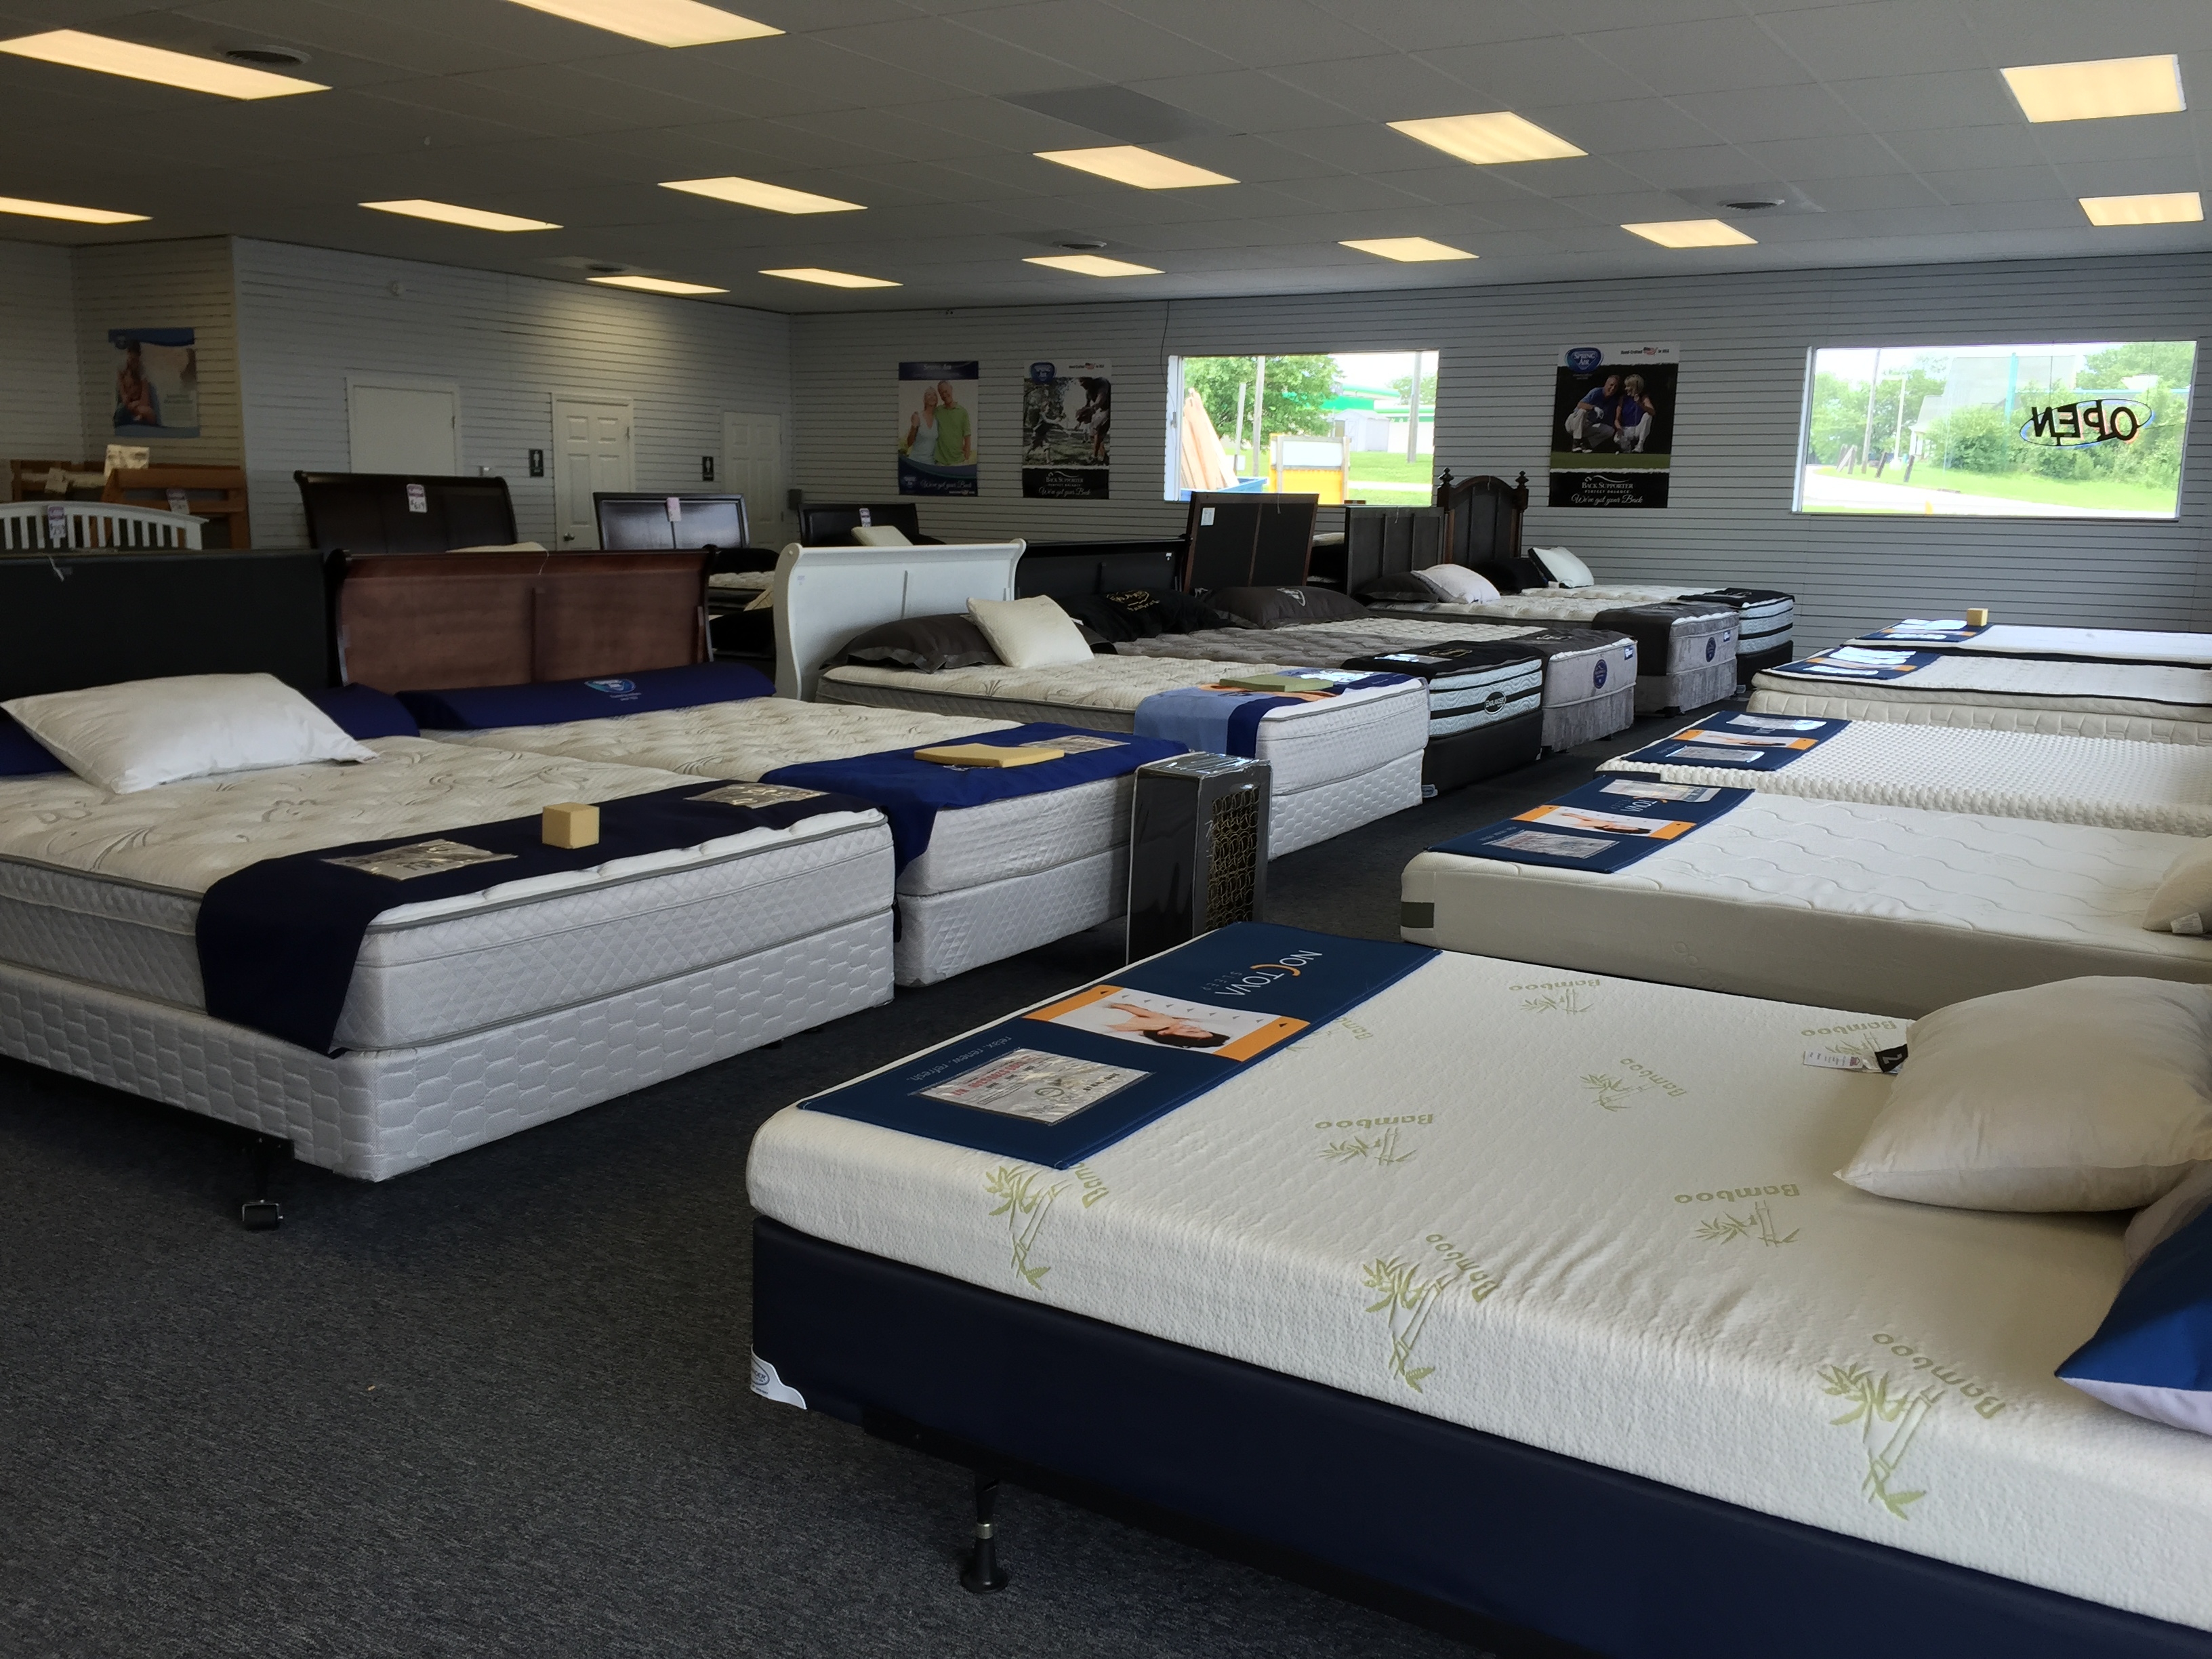 stores that sell mattresses and flooring